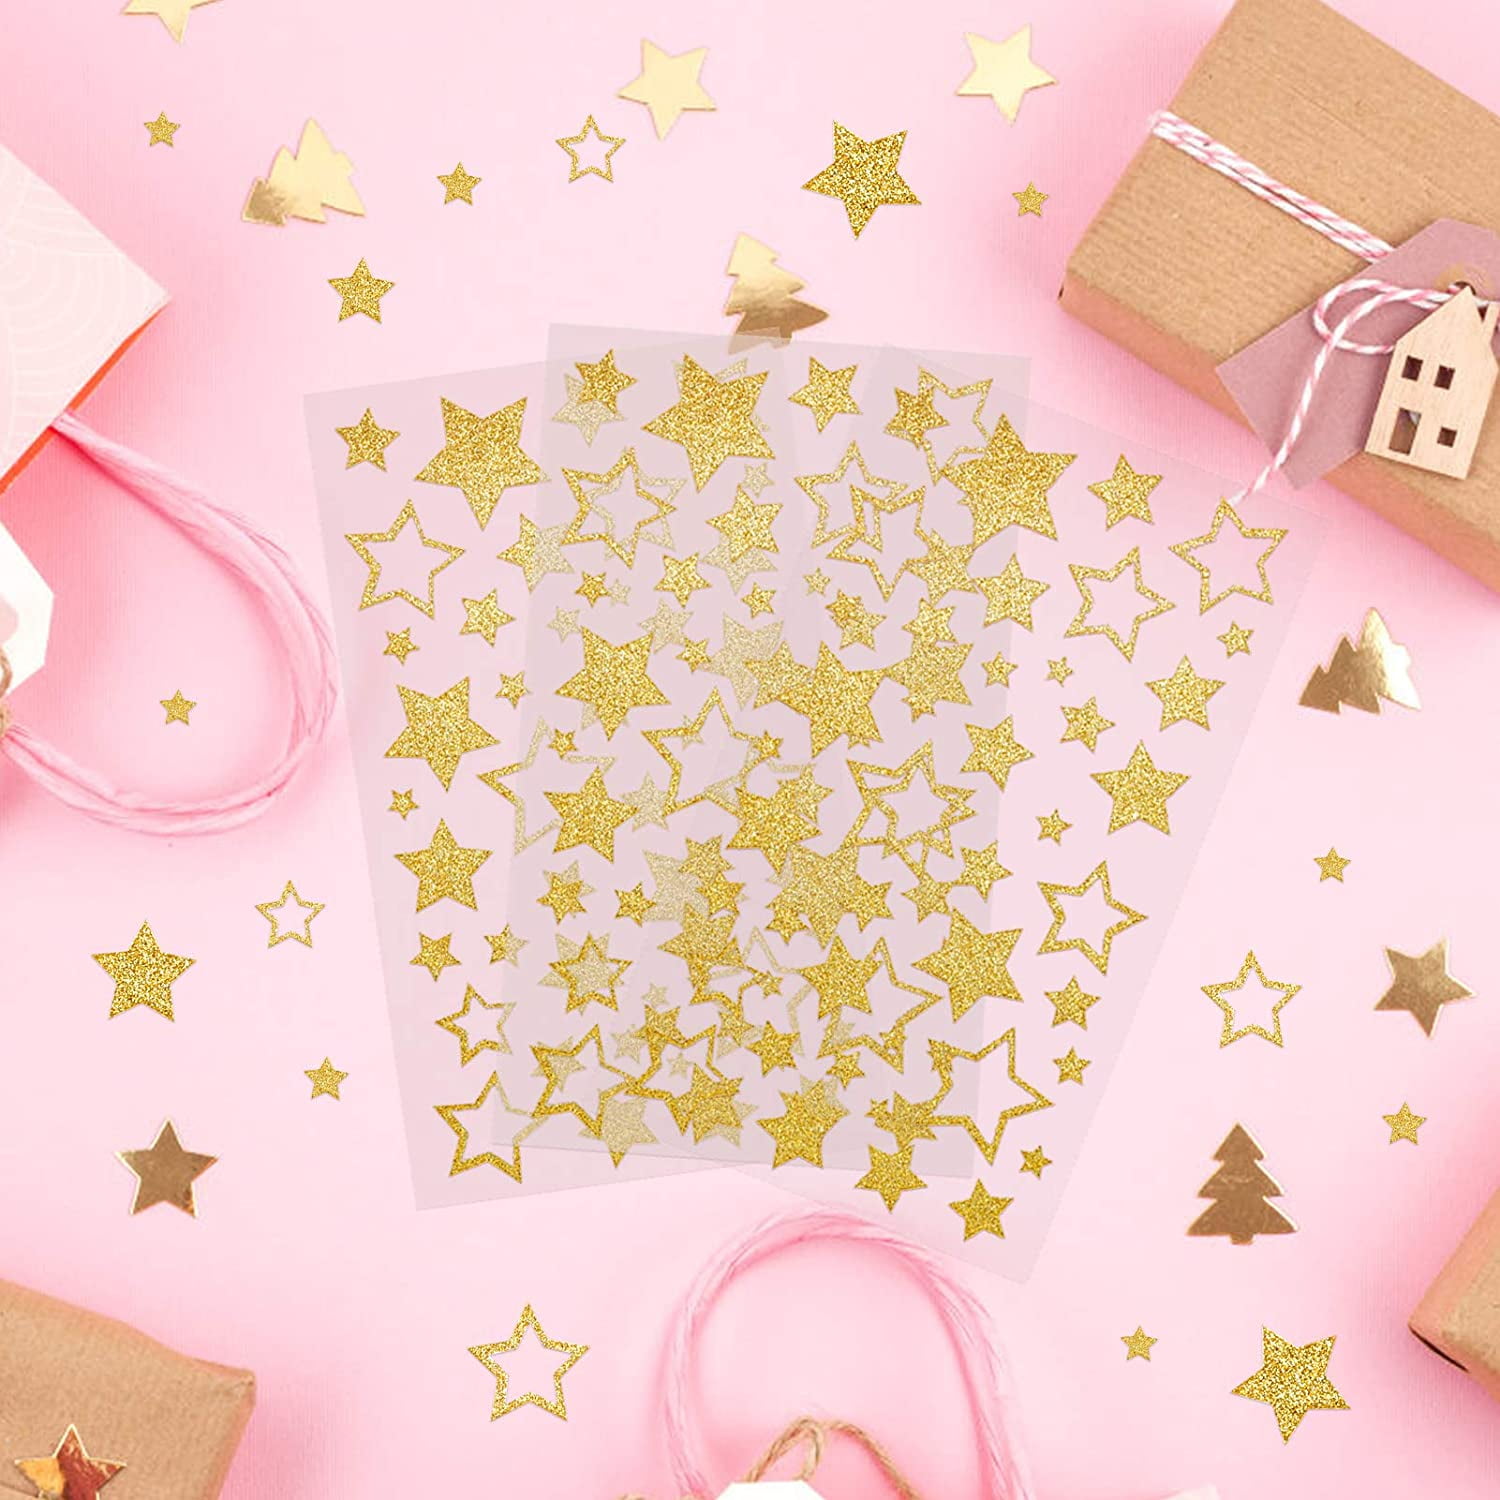 KESOTE Glitter Christmas Stickers, 5 Sheets Self-Adhesive Holiday Star  Snowflake Glitter Stickers for Crafts Envelopes Cards Gifts Christmas